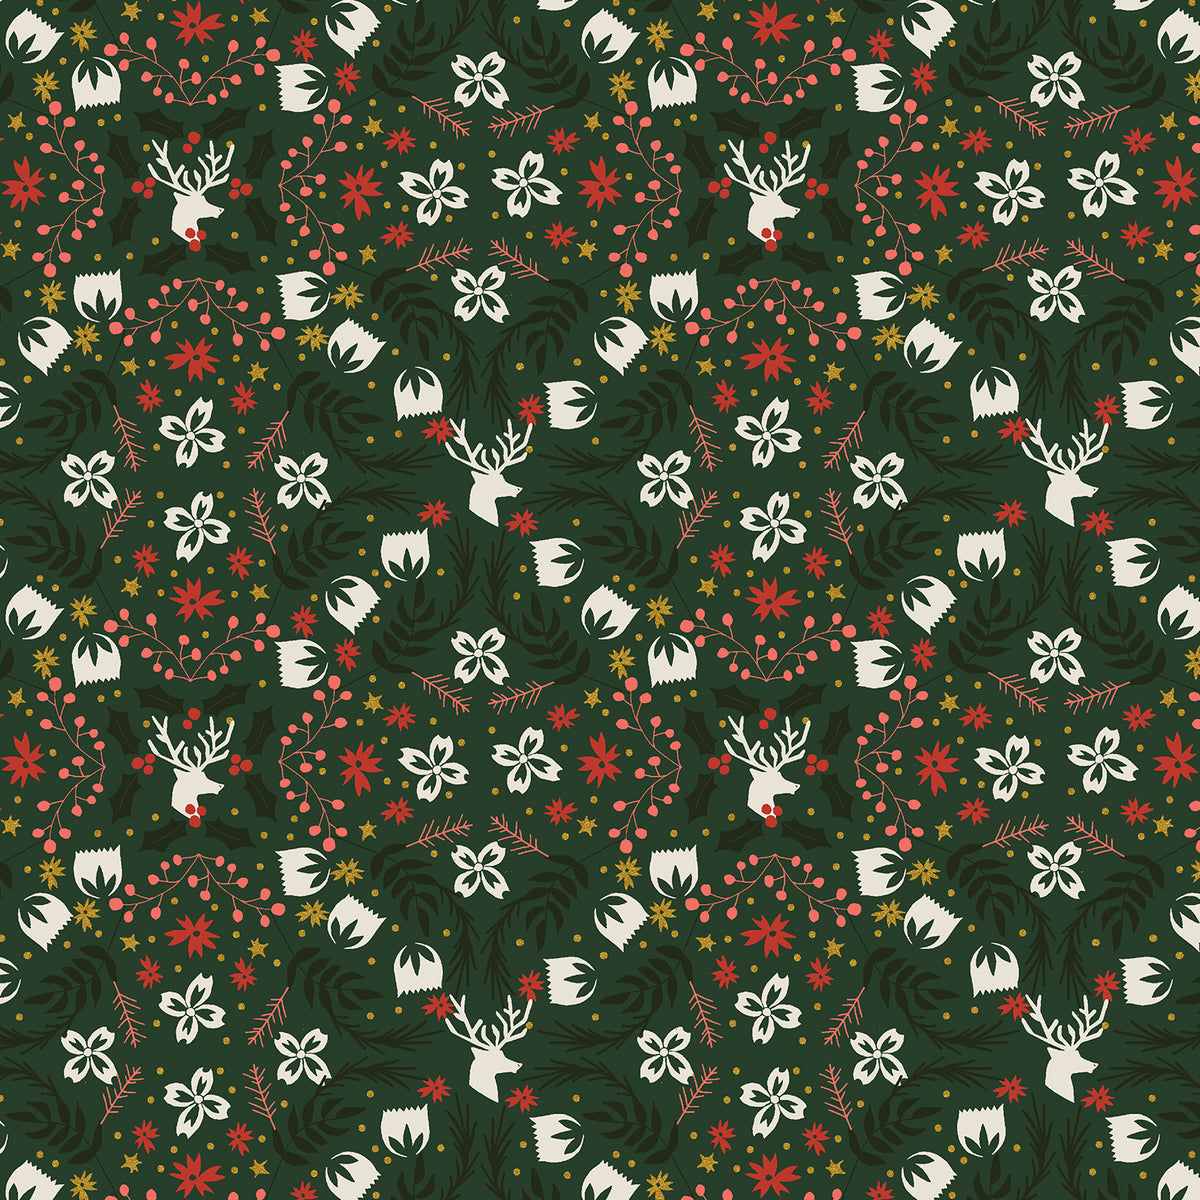 Tinsel on the Trail Quilt Fabric by Cotton+Steel - Gather (Reindeer Geometric) in Festive (Dark Green) - AC602-FE1M